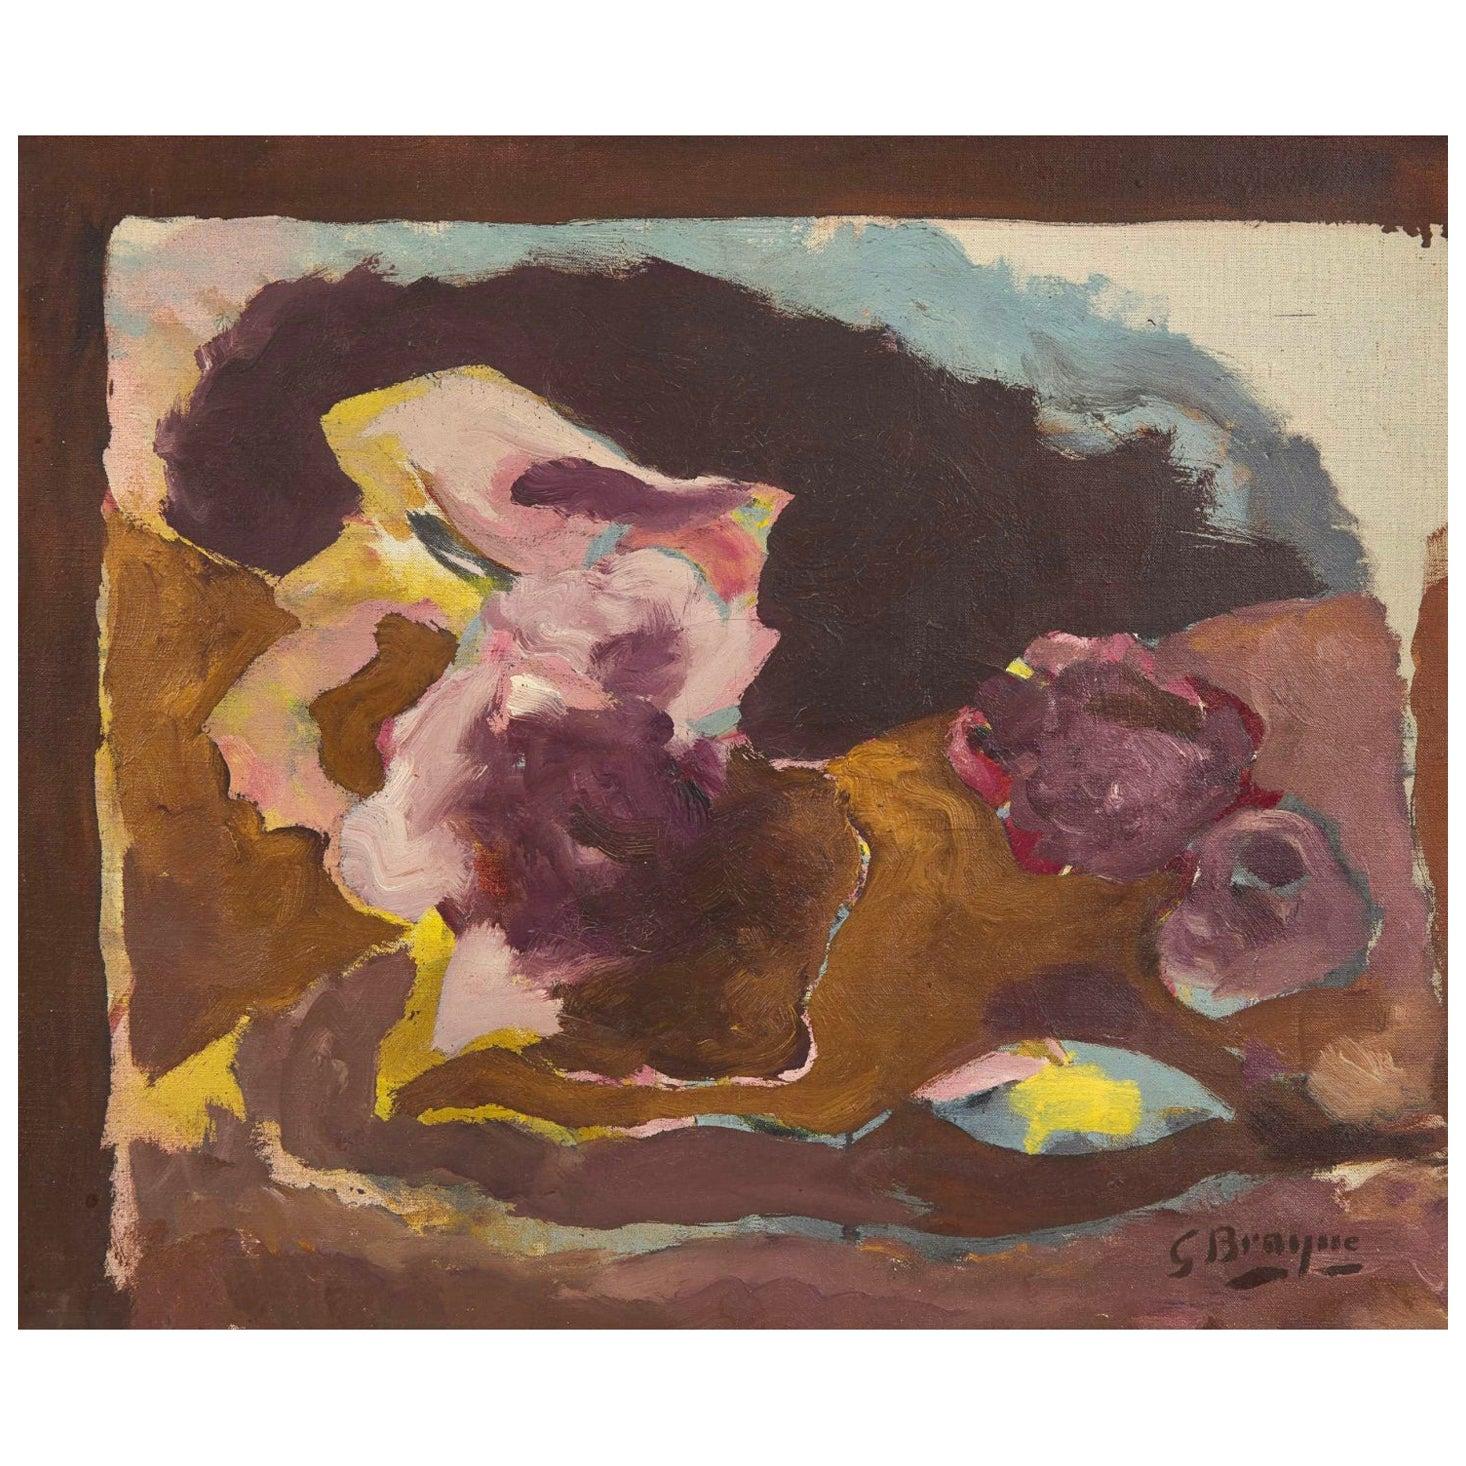 Georges Braque (French, 1882-1963) - Nature Morte au Pot
Signed ‘G Braque' (underlined) bottom right
Oil on canvas
Canvas: 18 x 21.75 in. (45.7 x 55.2cm)
Framed: 26 x 30 inches
Executed circa 1959

Provenance:
Galerie Beyeler, Basel,